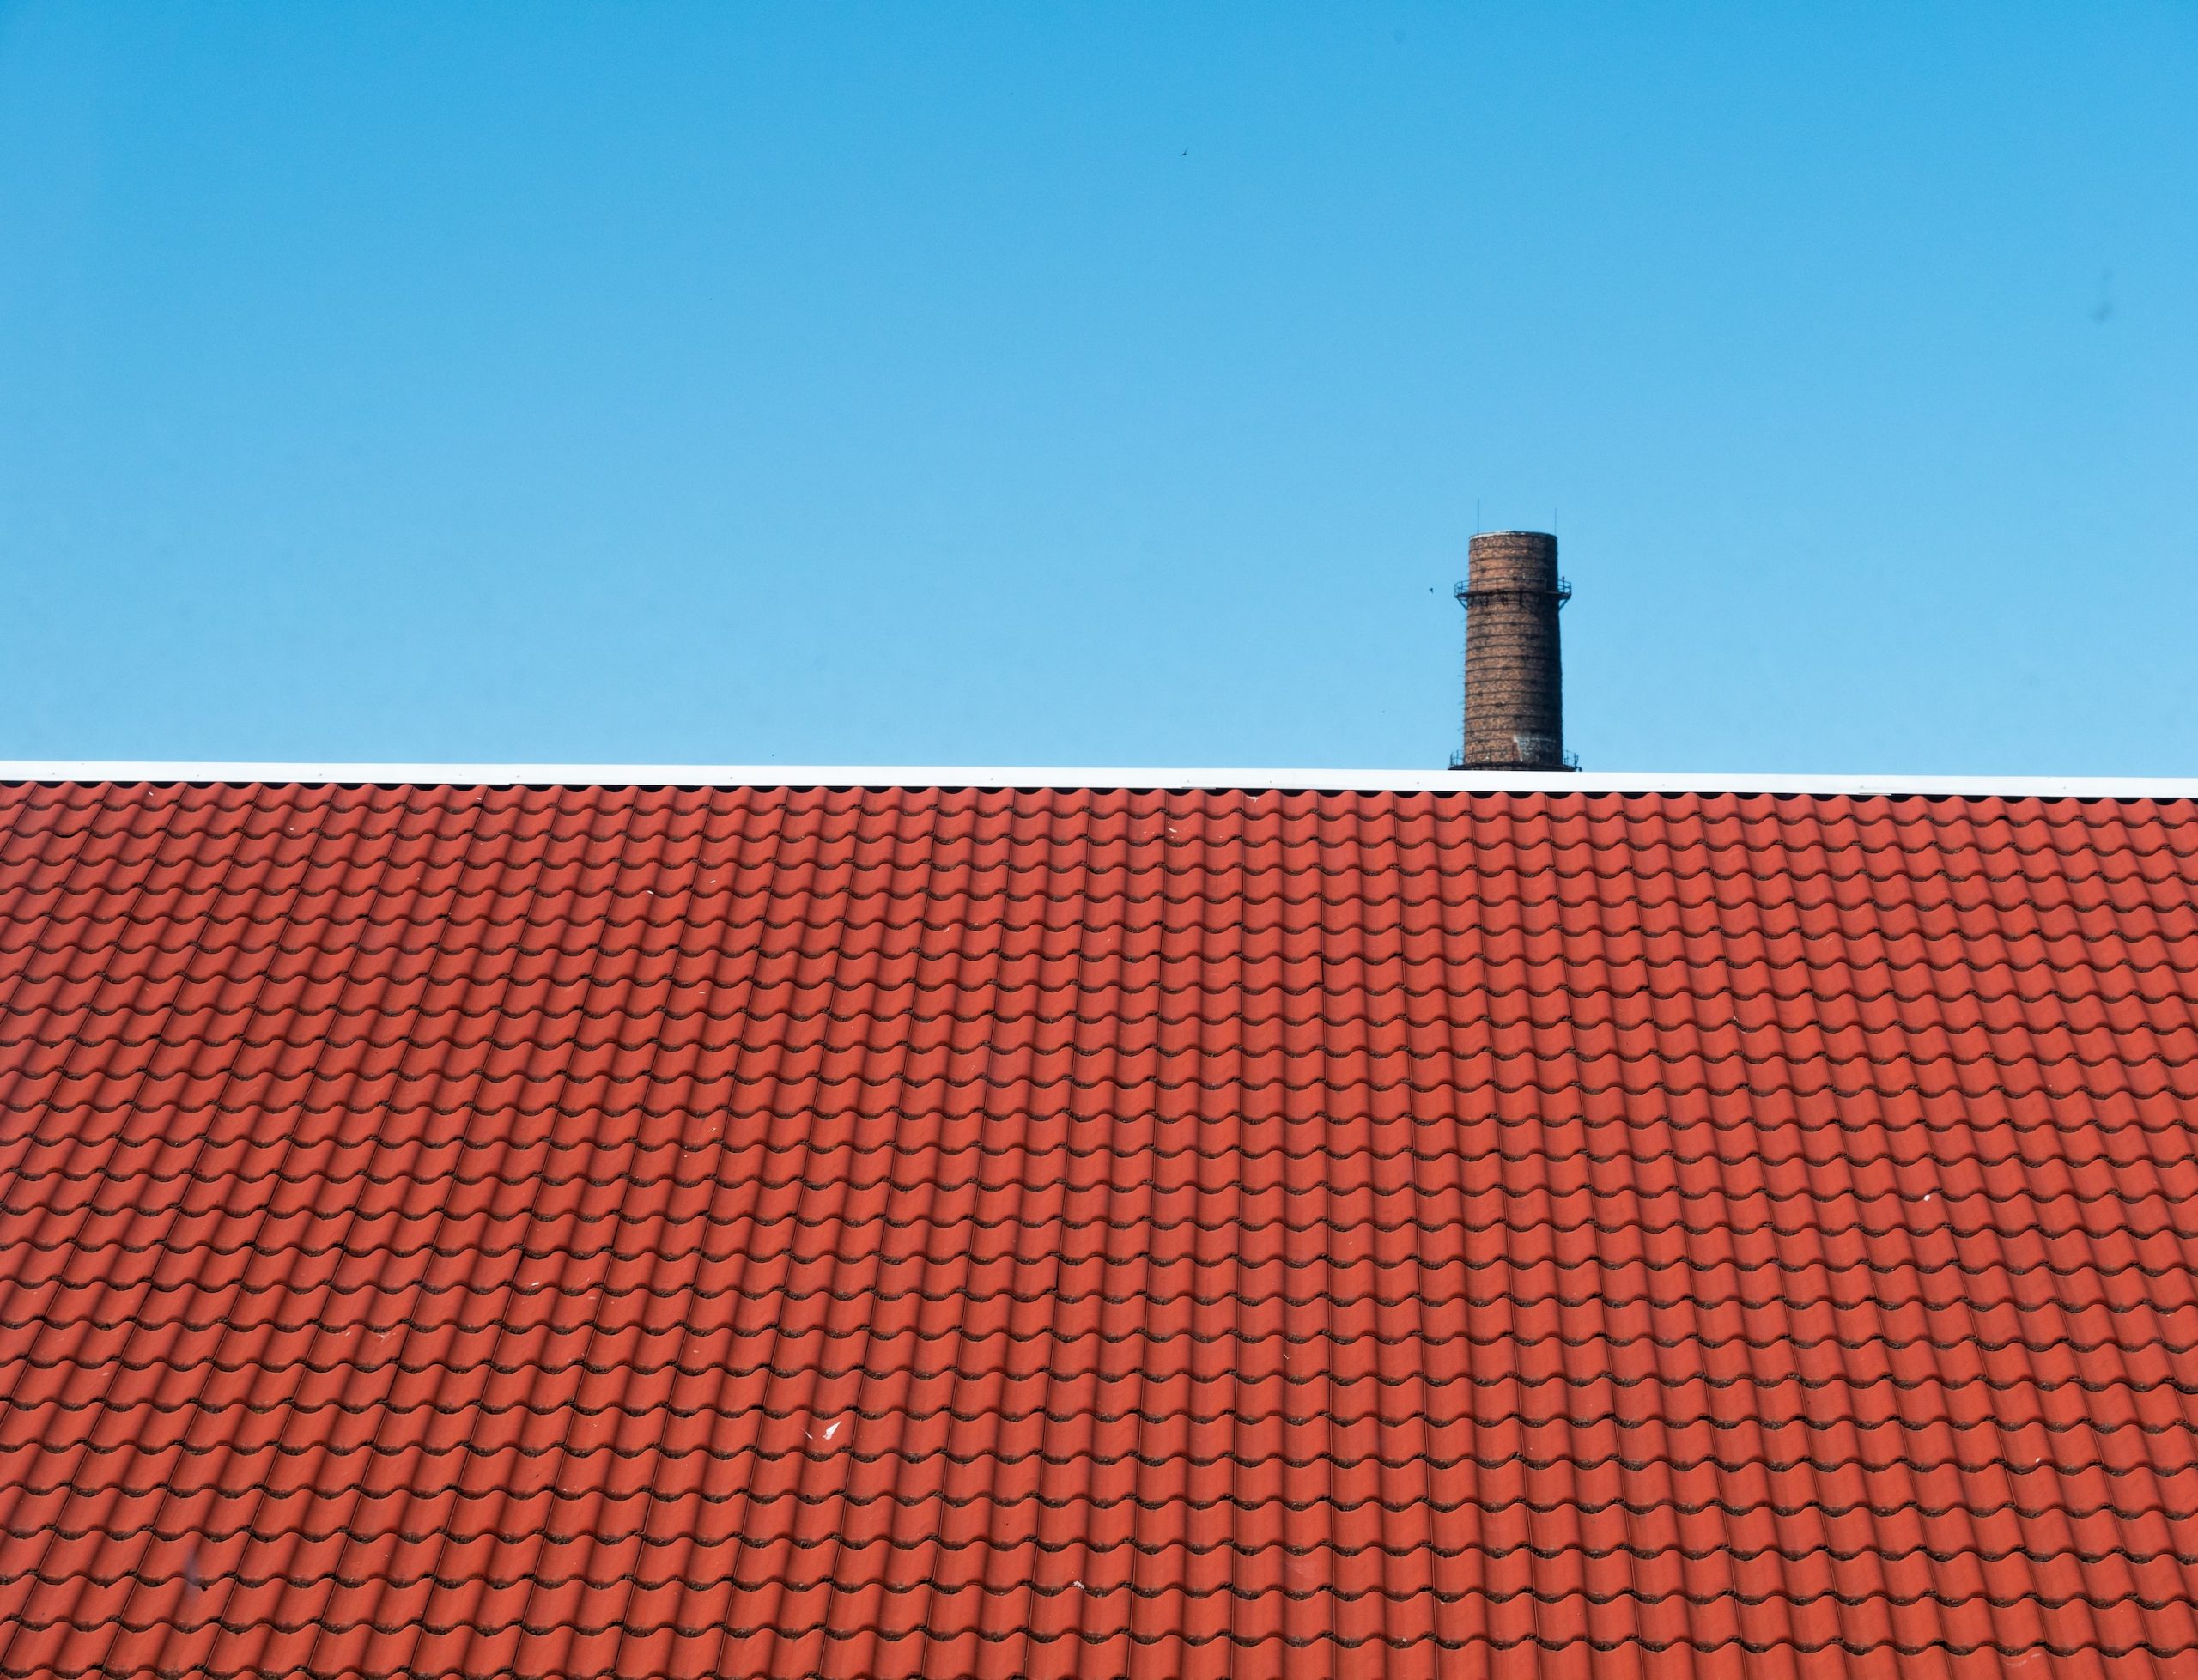 How to Spot the Signs of a Roof Leak - signs, roof leak, professional inspect, interior, exterior